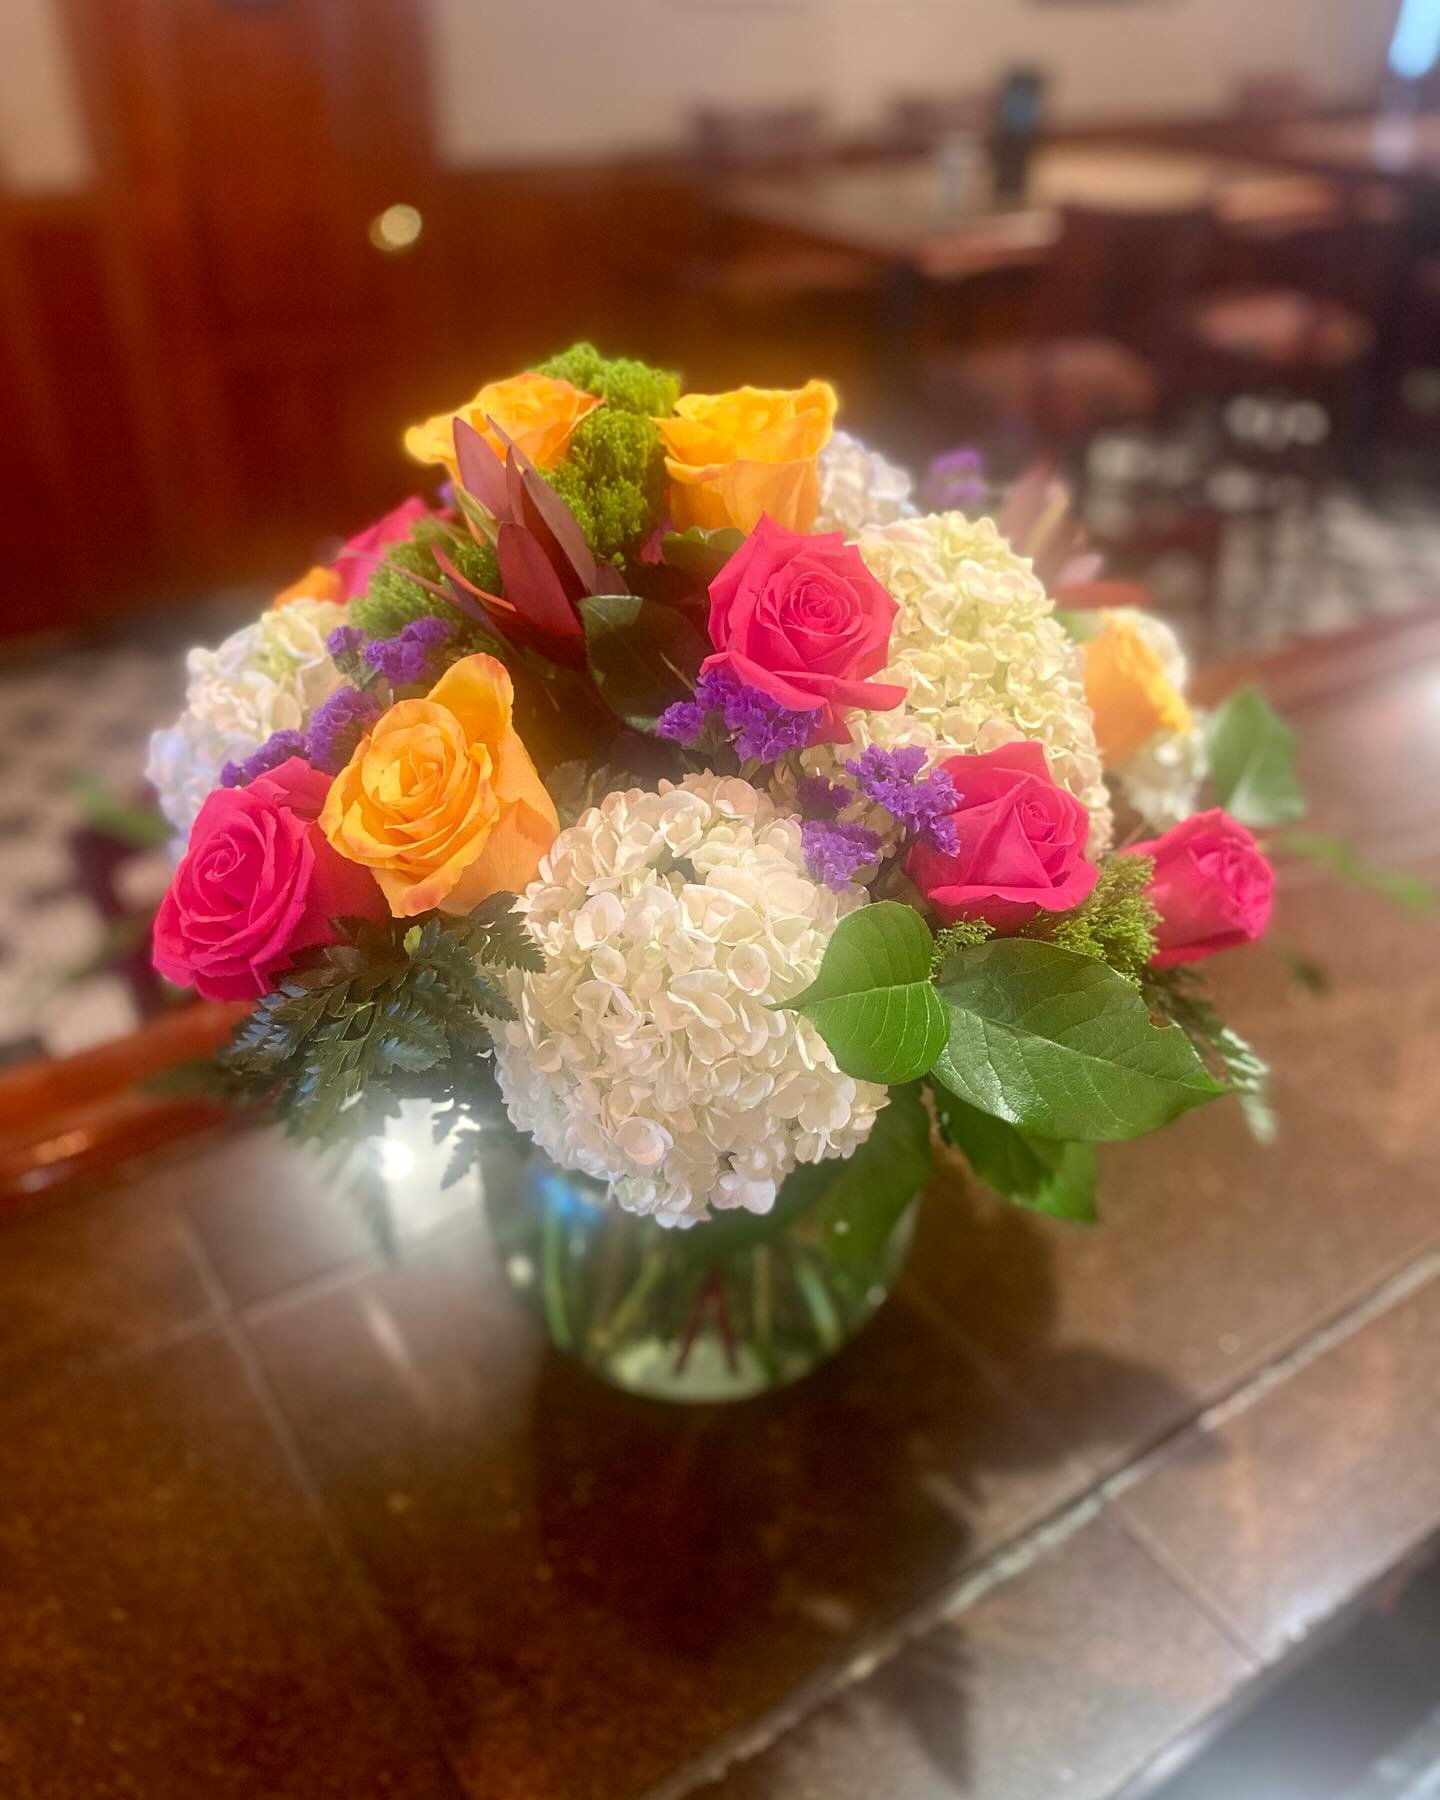 One of our most favorite guests sent these as we celebrate our 25th Anniversary @tiffanystapandgrill  Thanks Ken!  @everyone @followers #tiffanystapandgrill